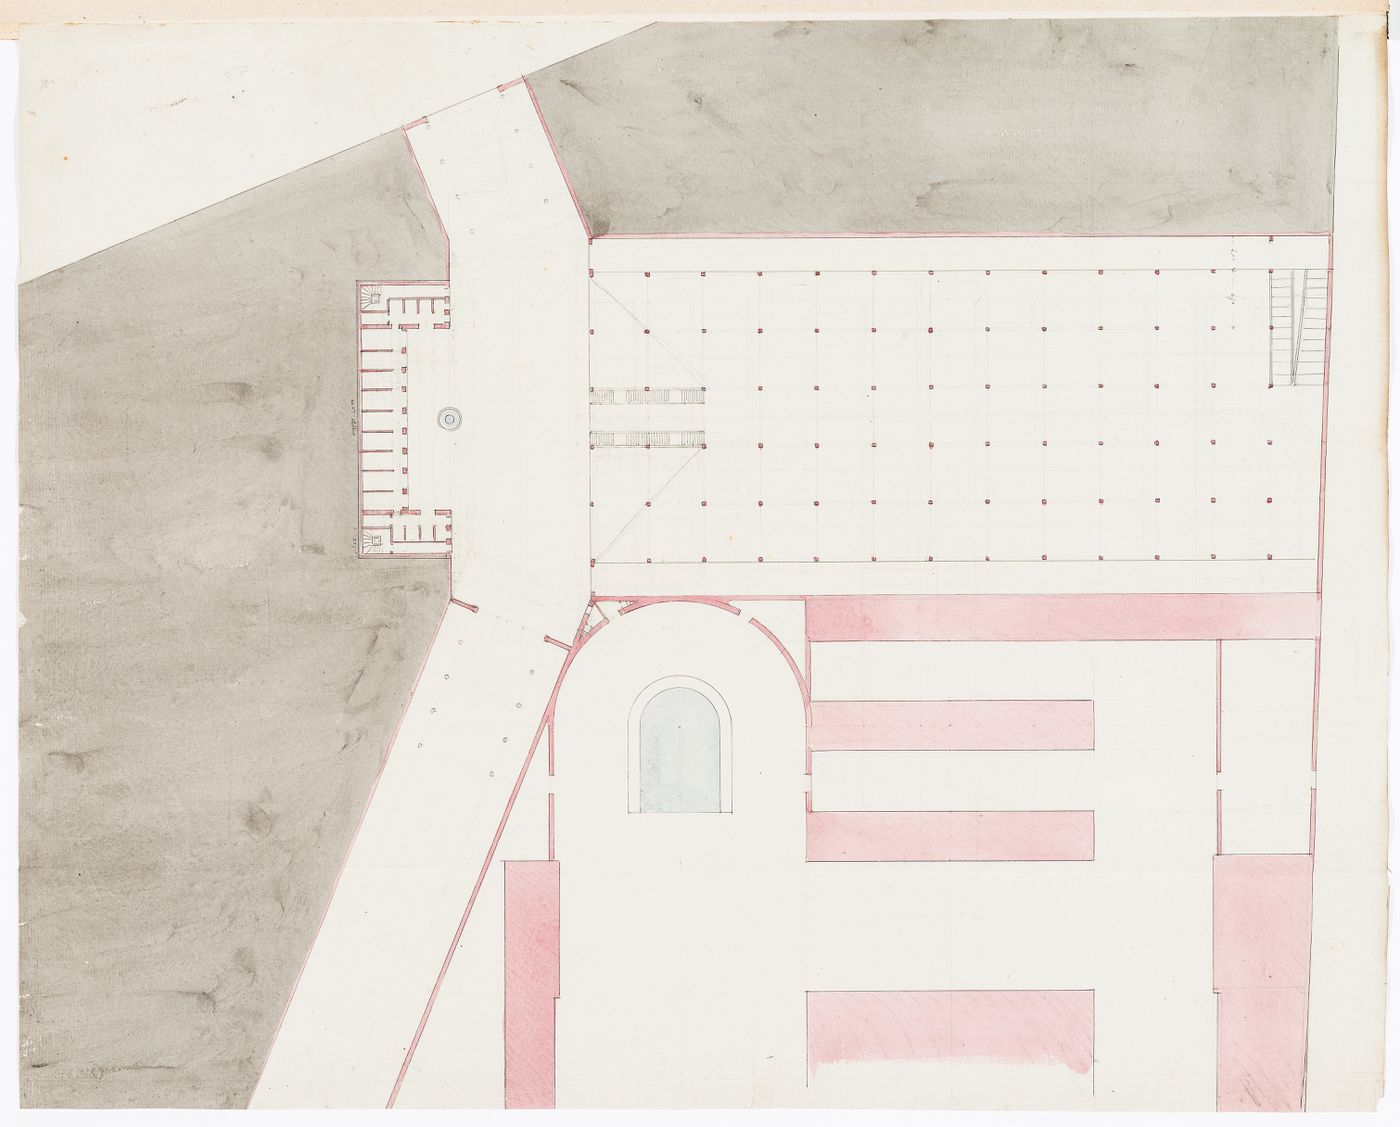 Project for a horse auction house and infirmary, Clos St. Charles, nouveau quartier Poissonnière: Plan for a shed adjacent to the horse auction house